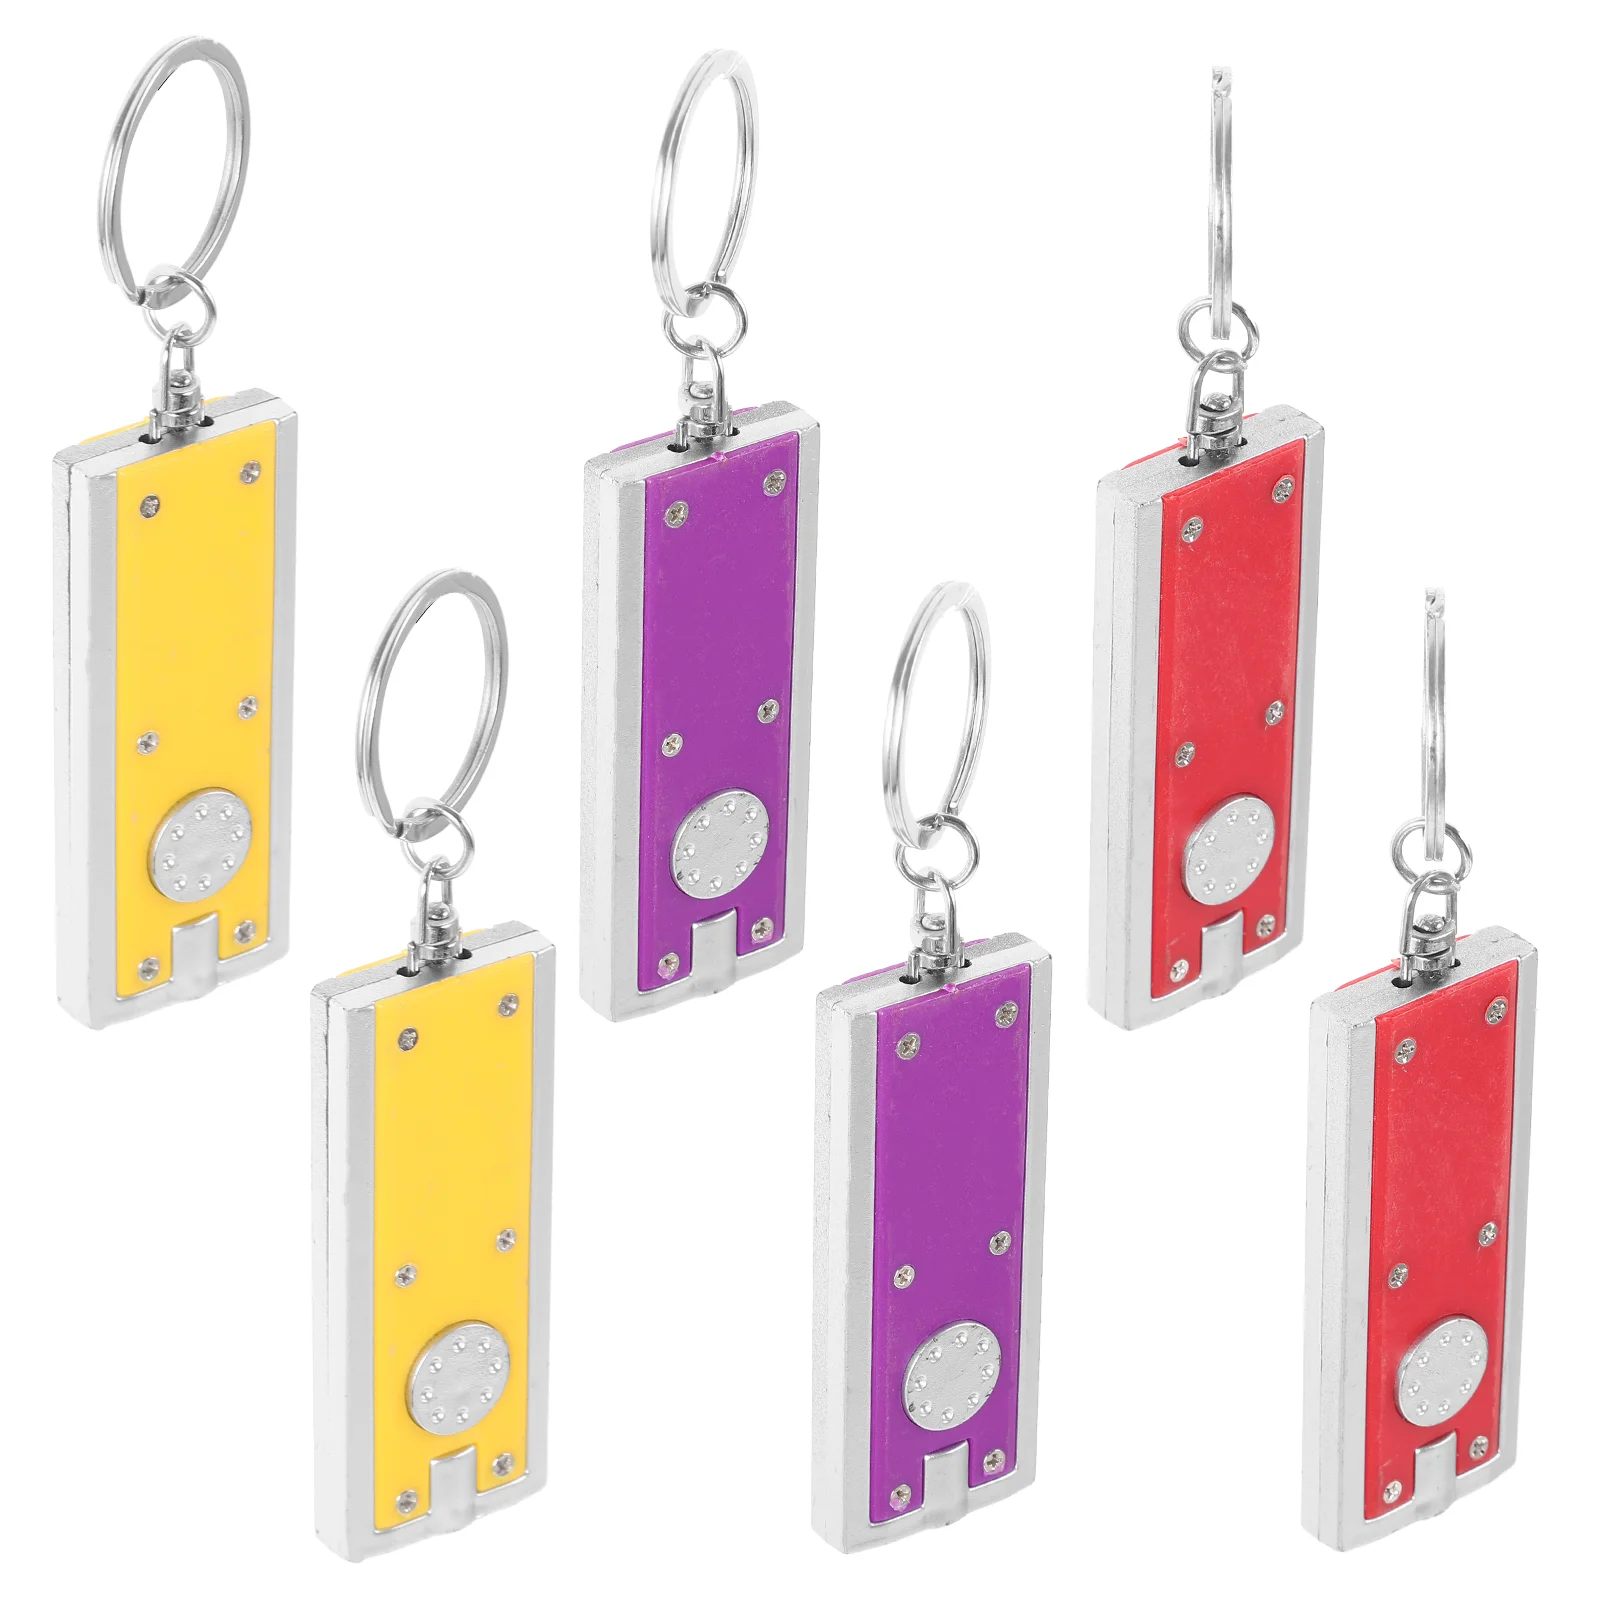 

Led Keychains Tiny Light: Flashlight Key Ring Collar Light in Assorted Colors Portable Key Chain Flash Light for Camping